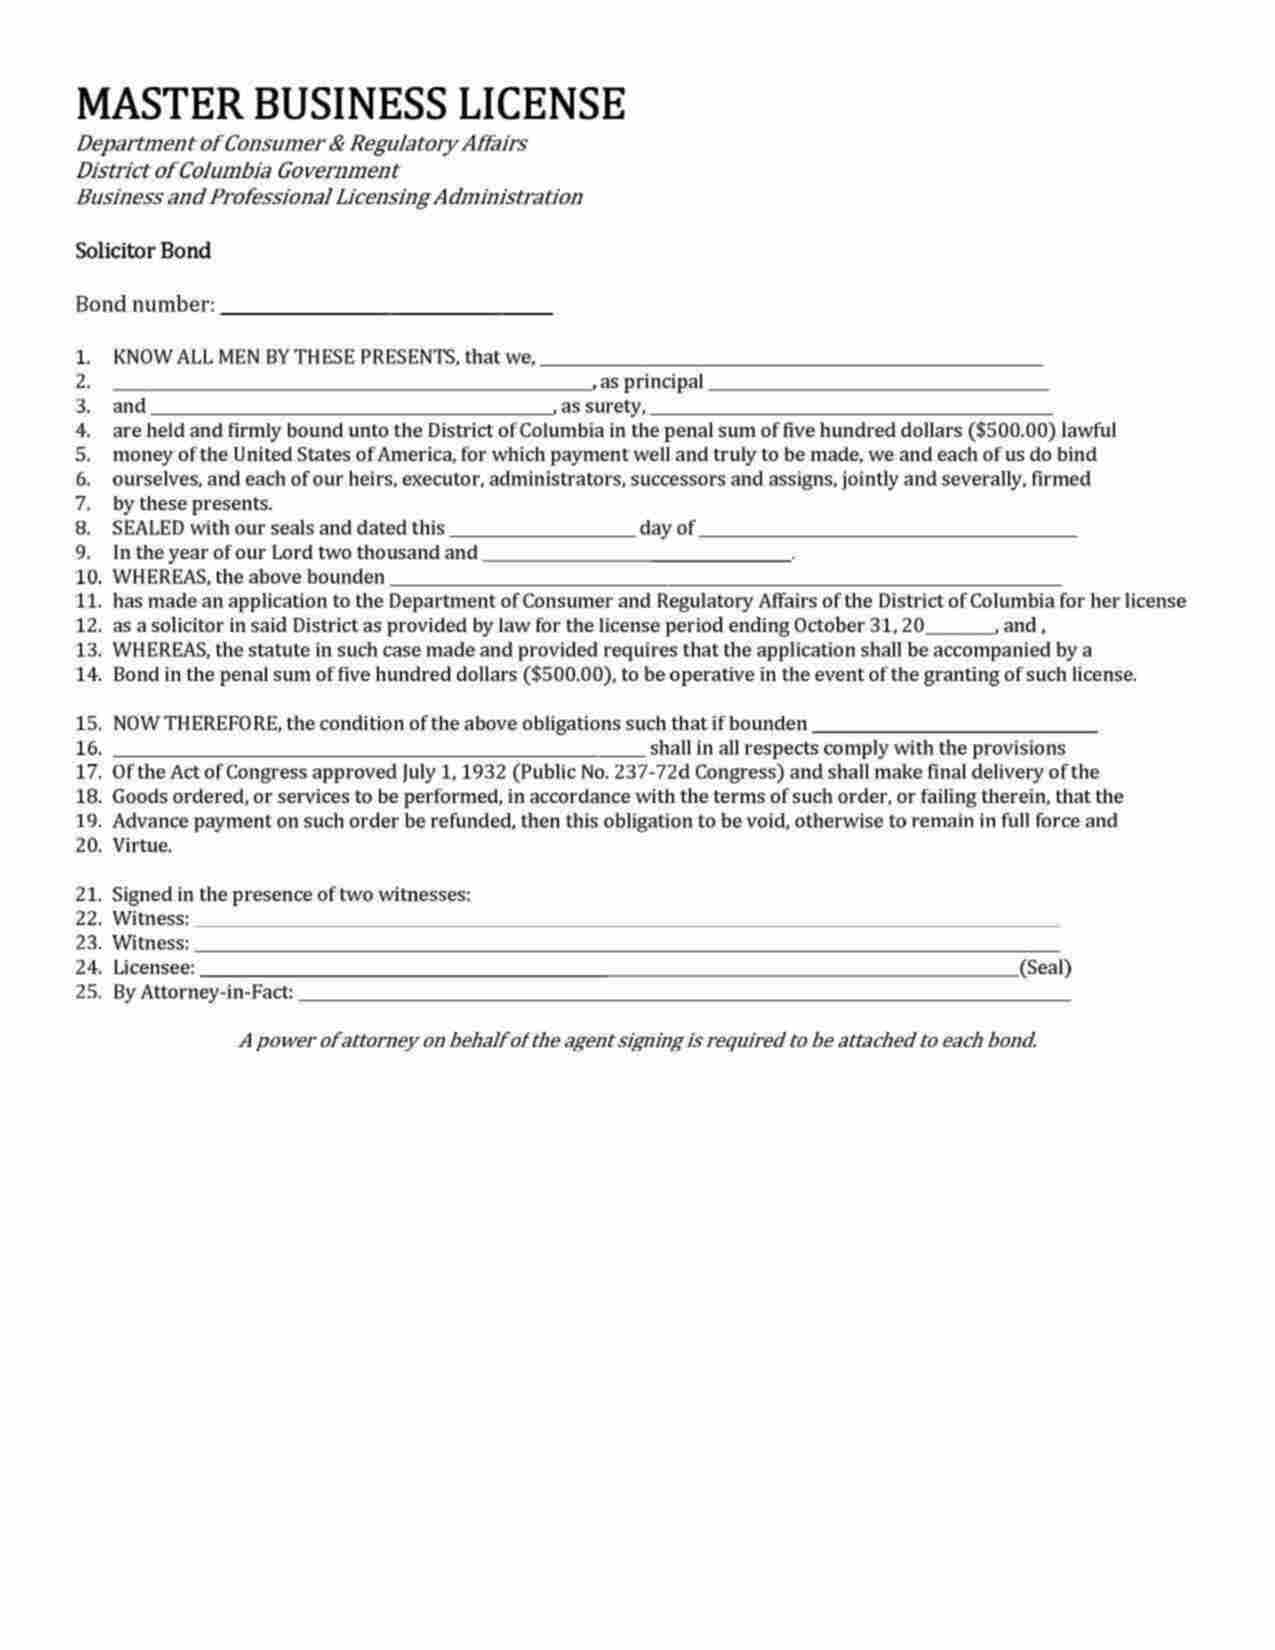 District of Columbia Solicitor Bond Form